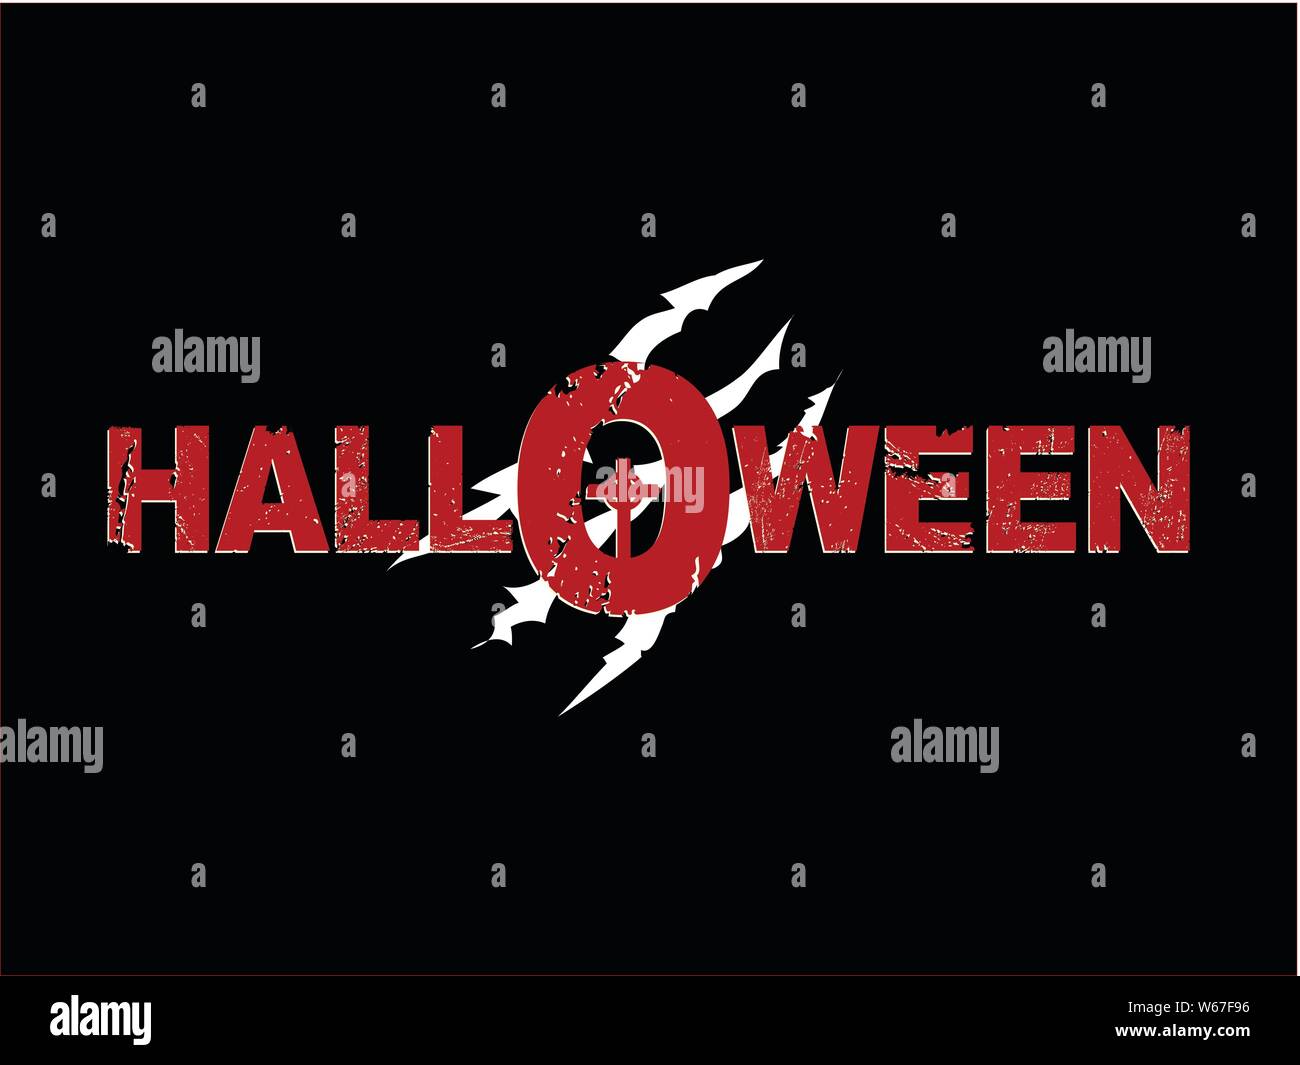 Halloween Red Grunge Decorative Text With Tombstone Cross and Scratches Over Black Background Stock Vector